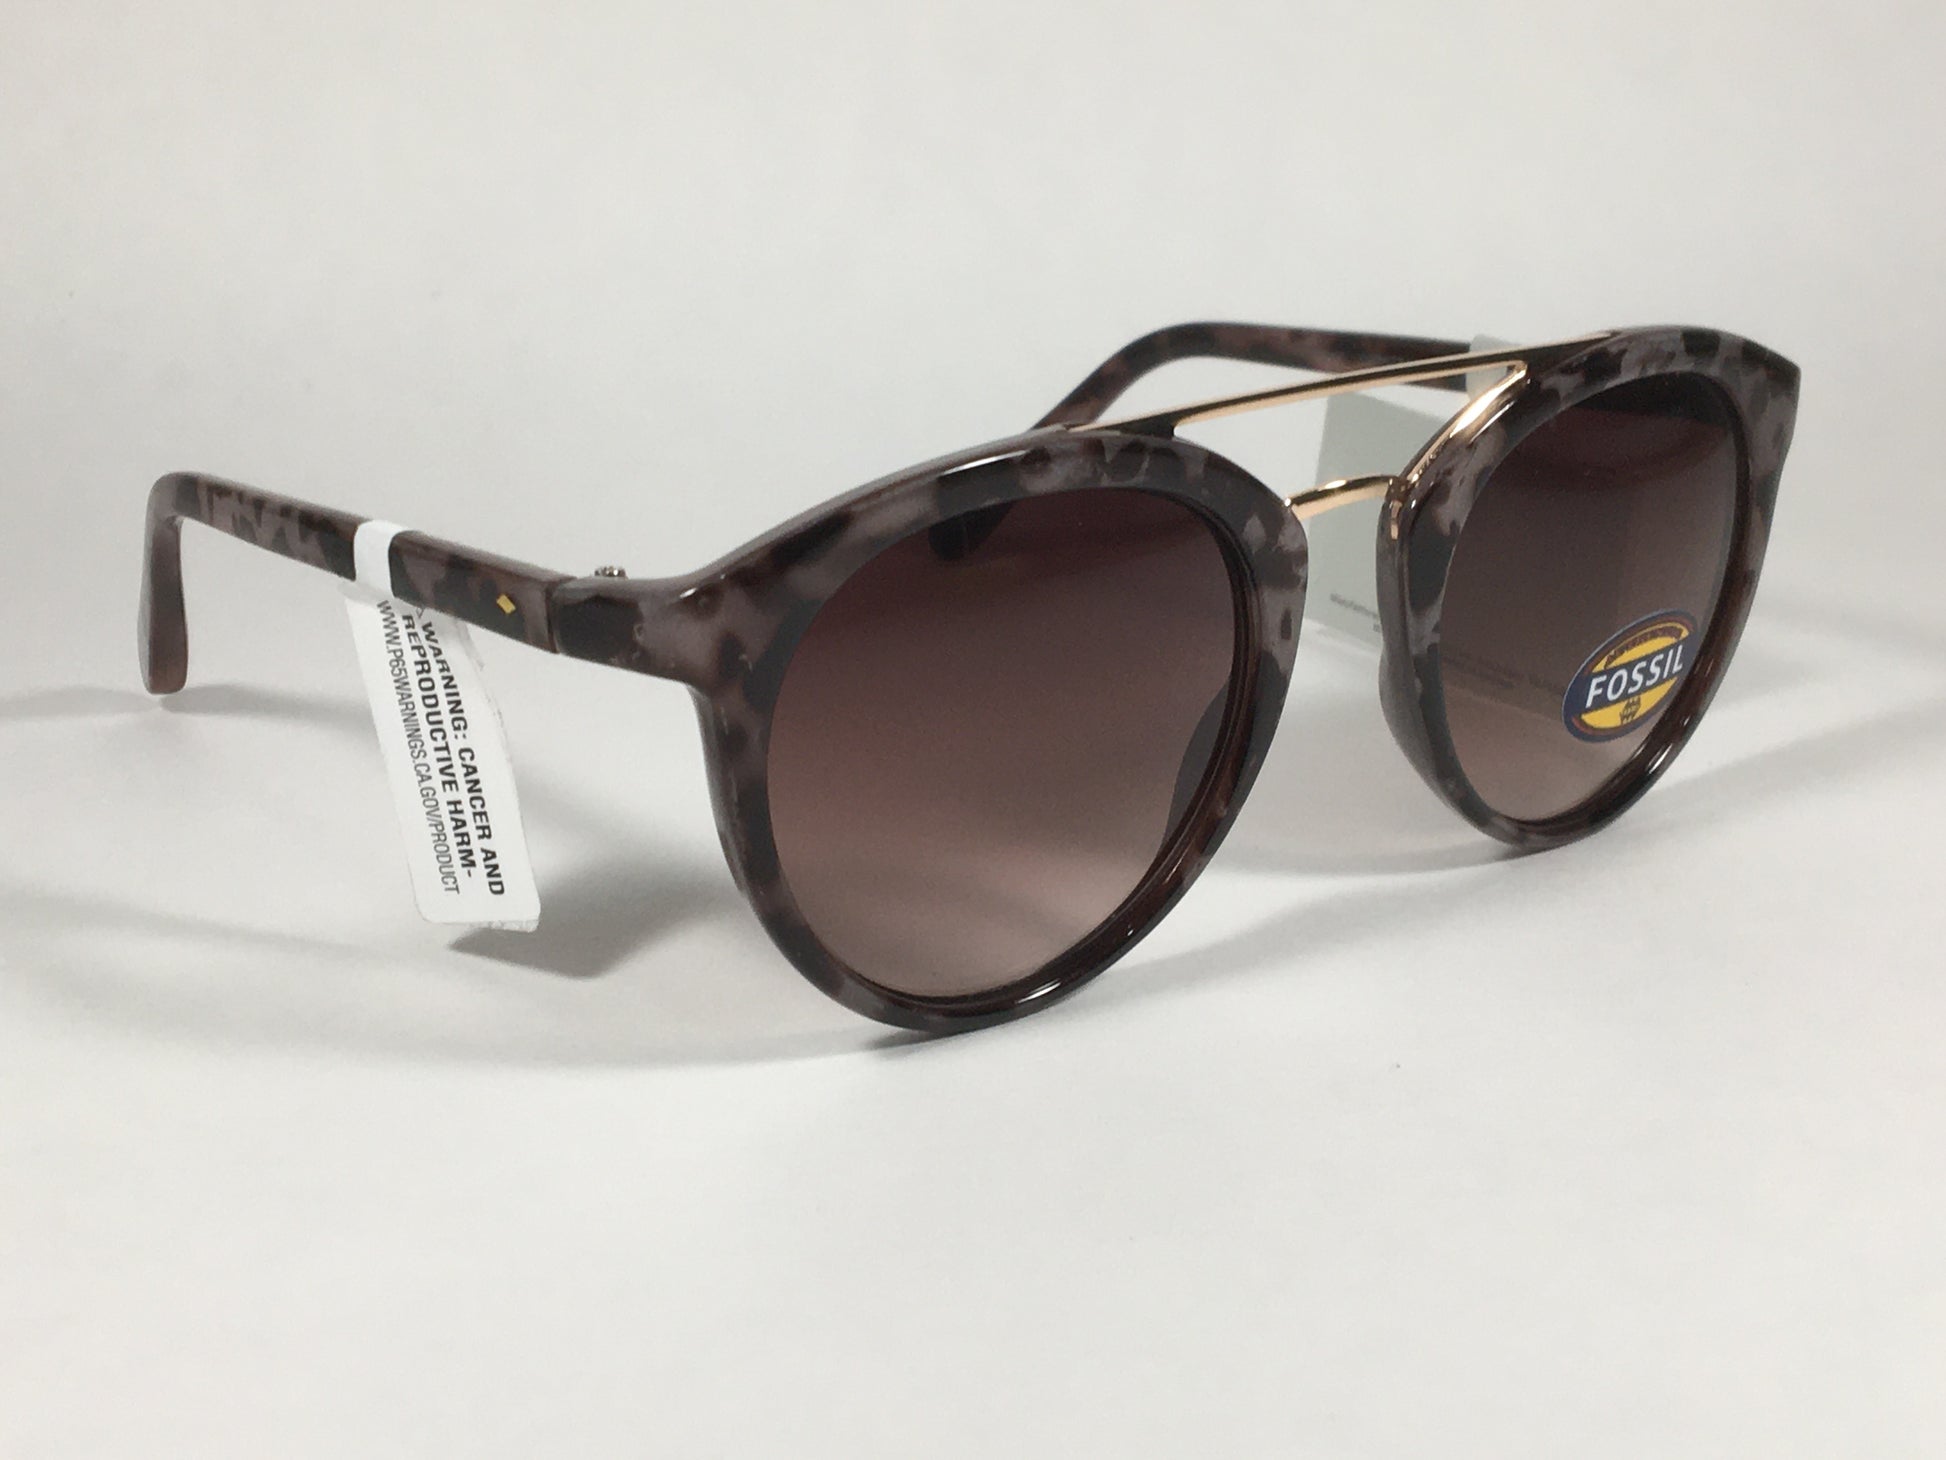 Fossil Round Brow Bar Sunglasses FW151 Brown Frame Brown Gradient Lens - Sunglasses